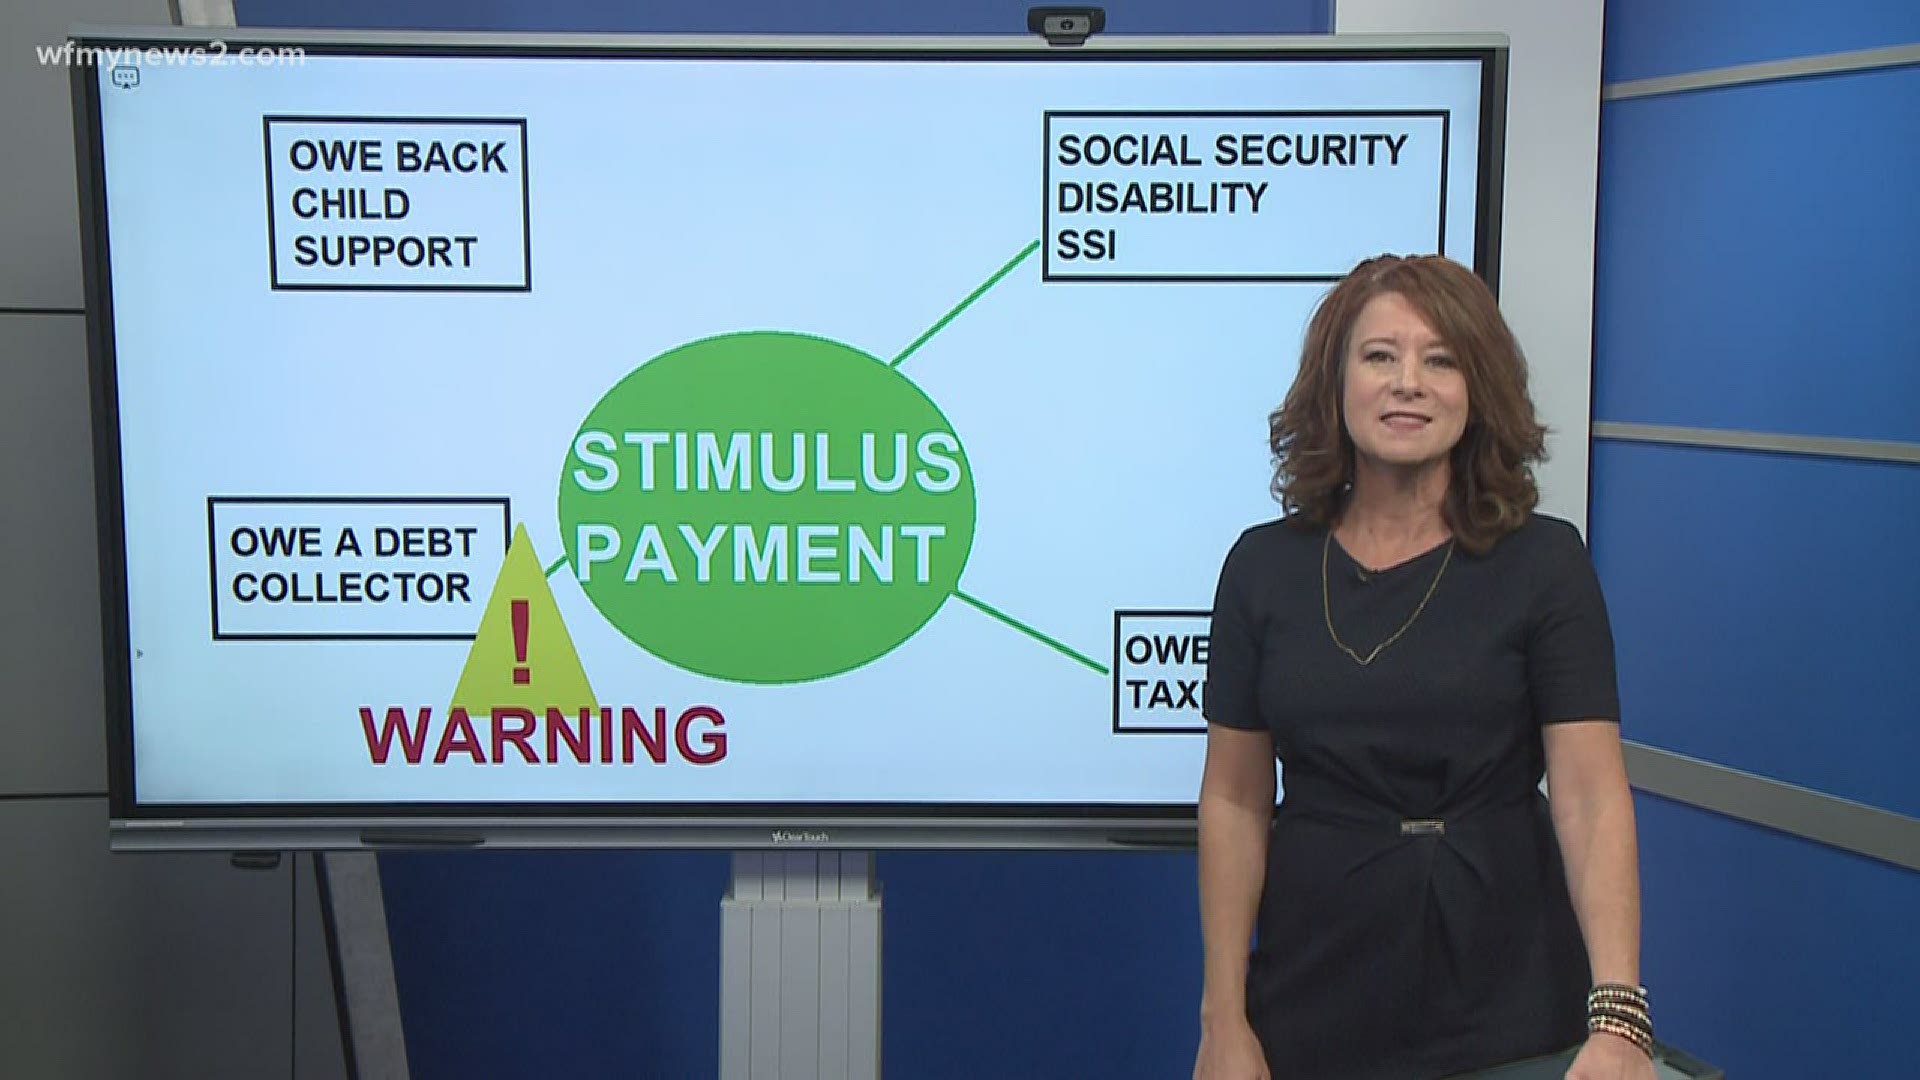 If you get any kind of social security benefit, you're getting a stimulus payment. If you owe back taxes, you still get a stimulus payment.